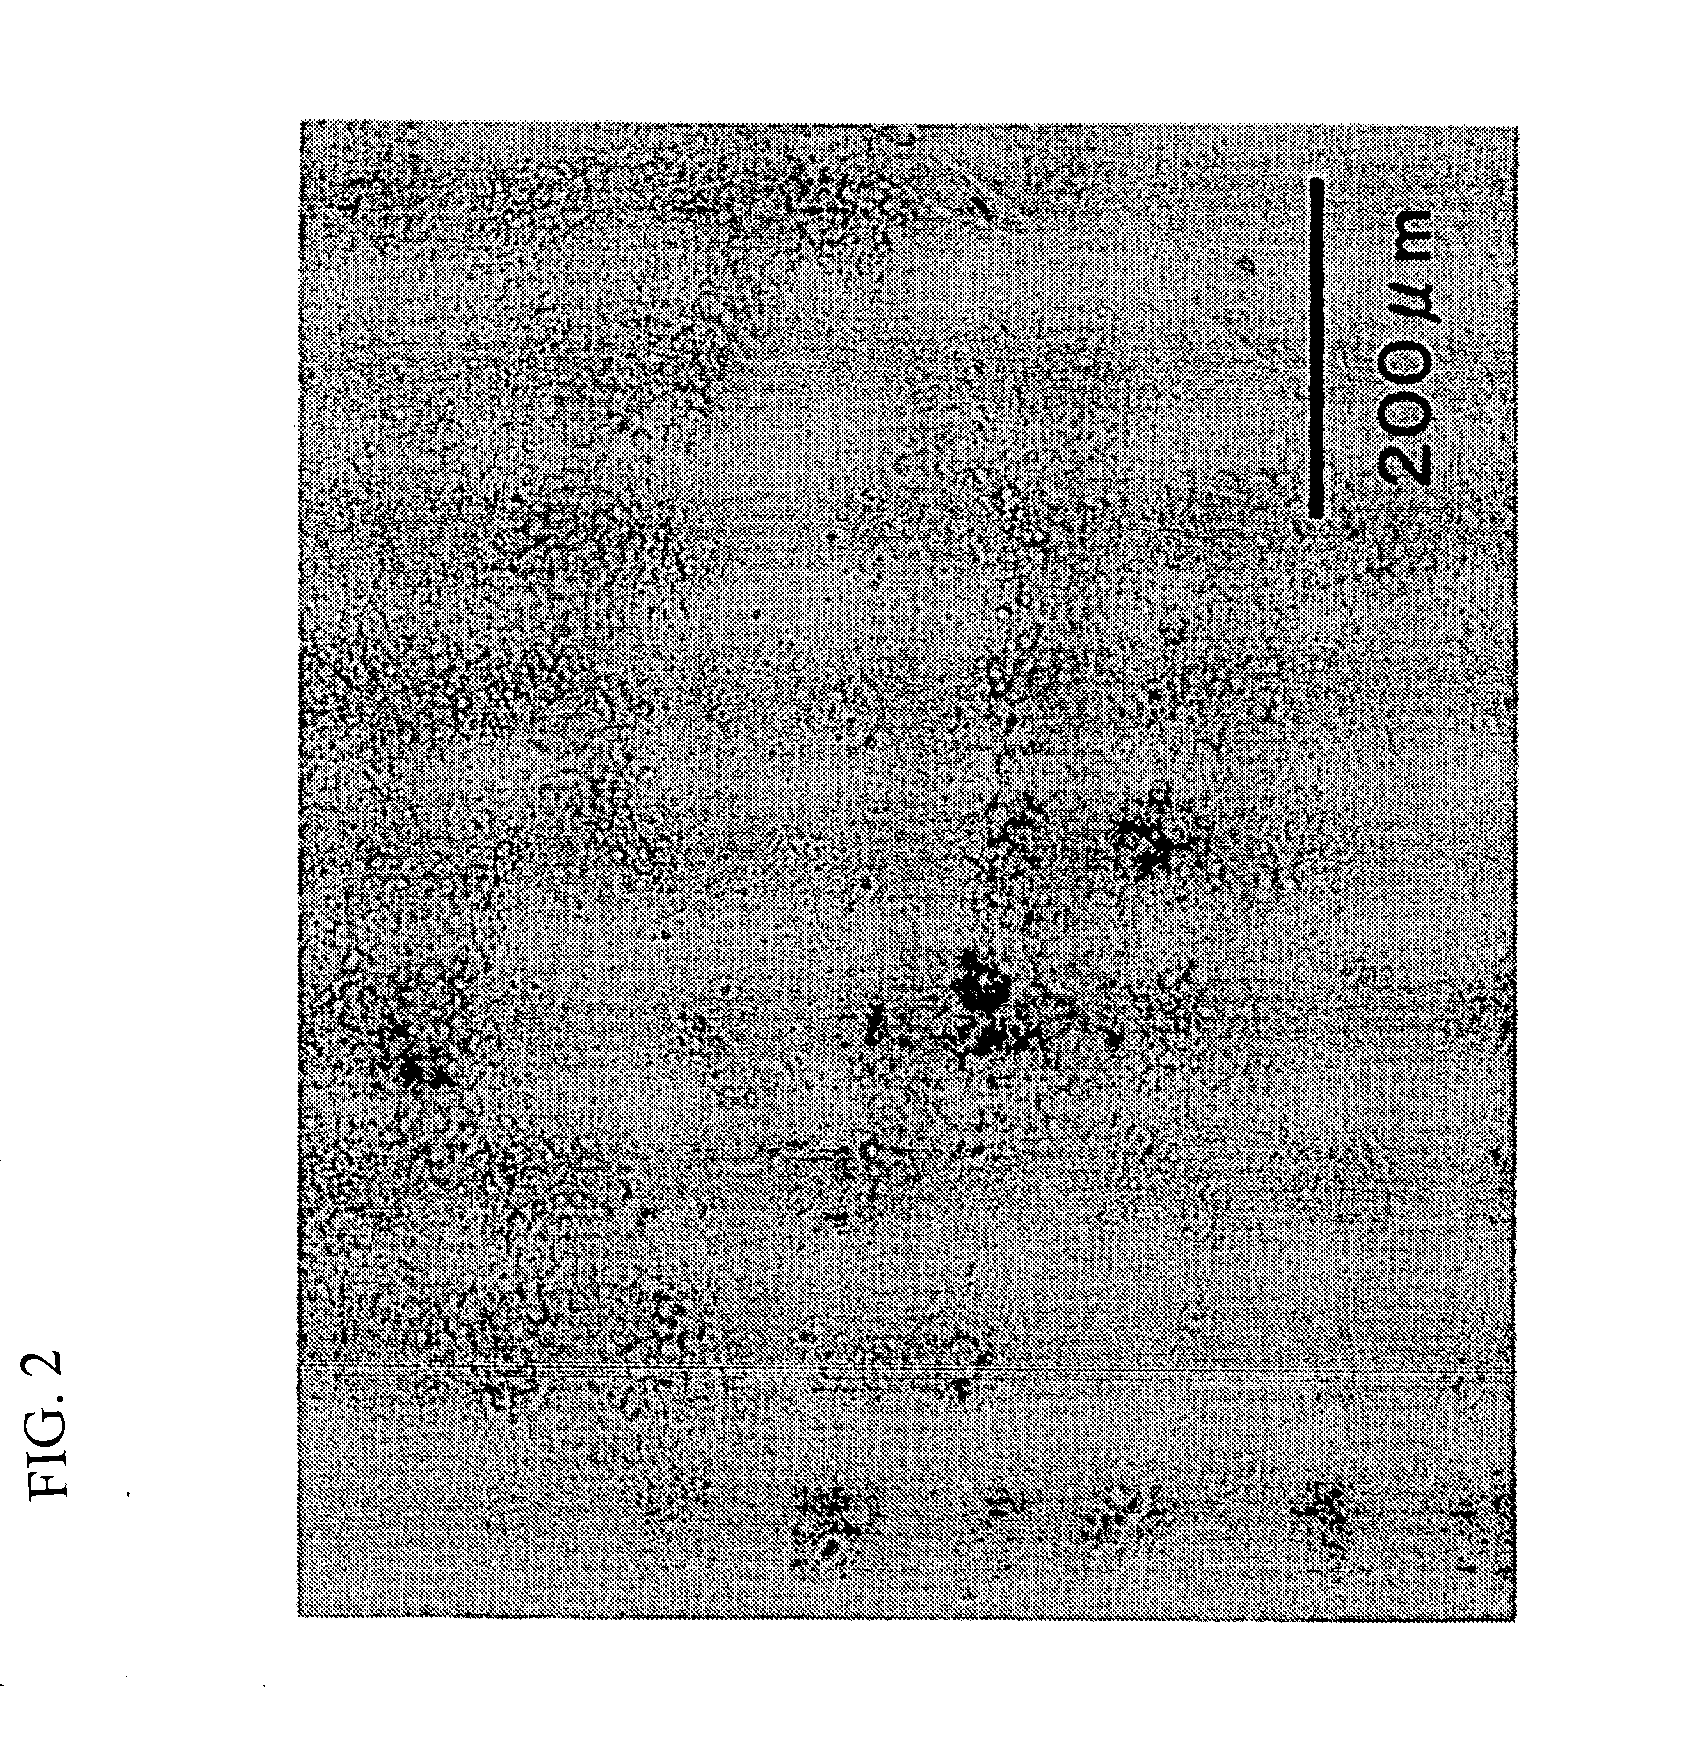 Container for germ layer formation and method of forming germ layer